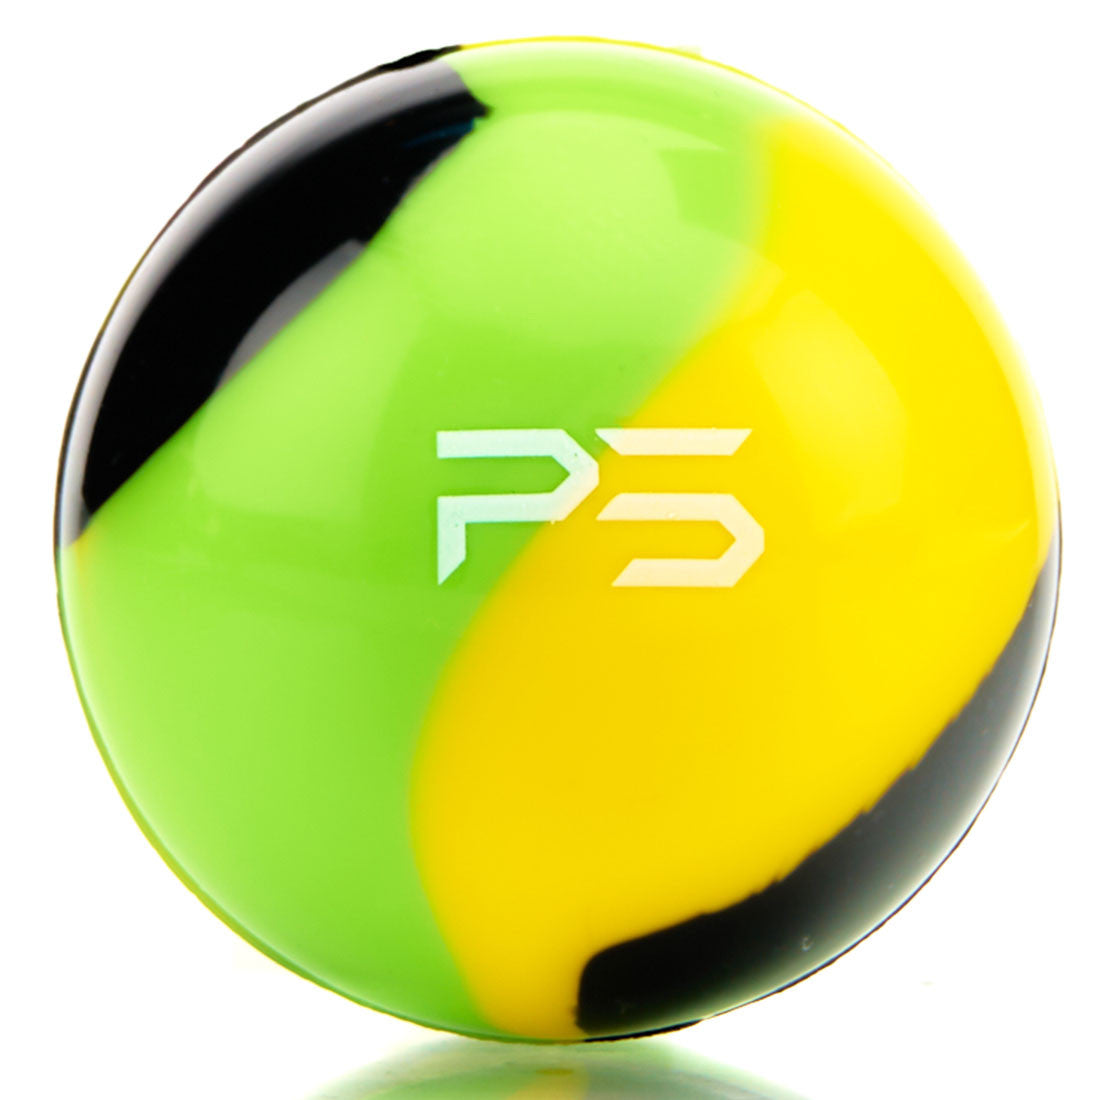 Paradise Silicone Bouncy Ball Silicone Dab Container